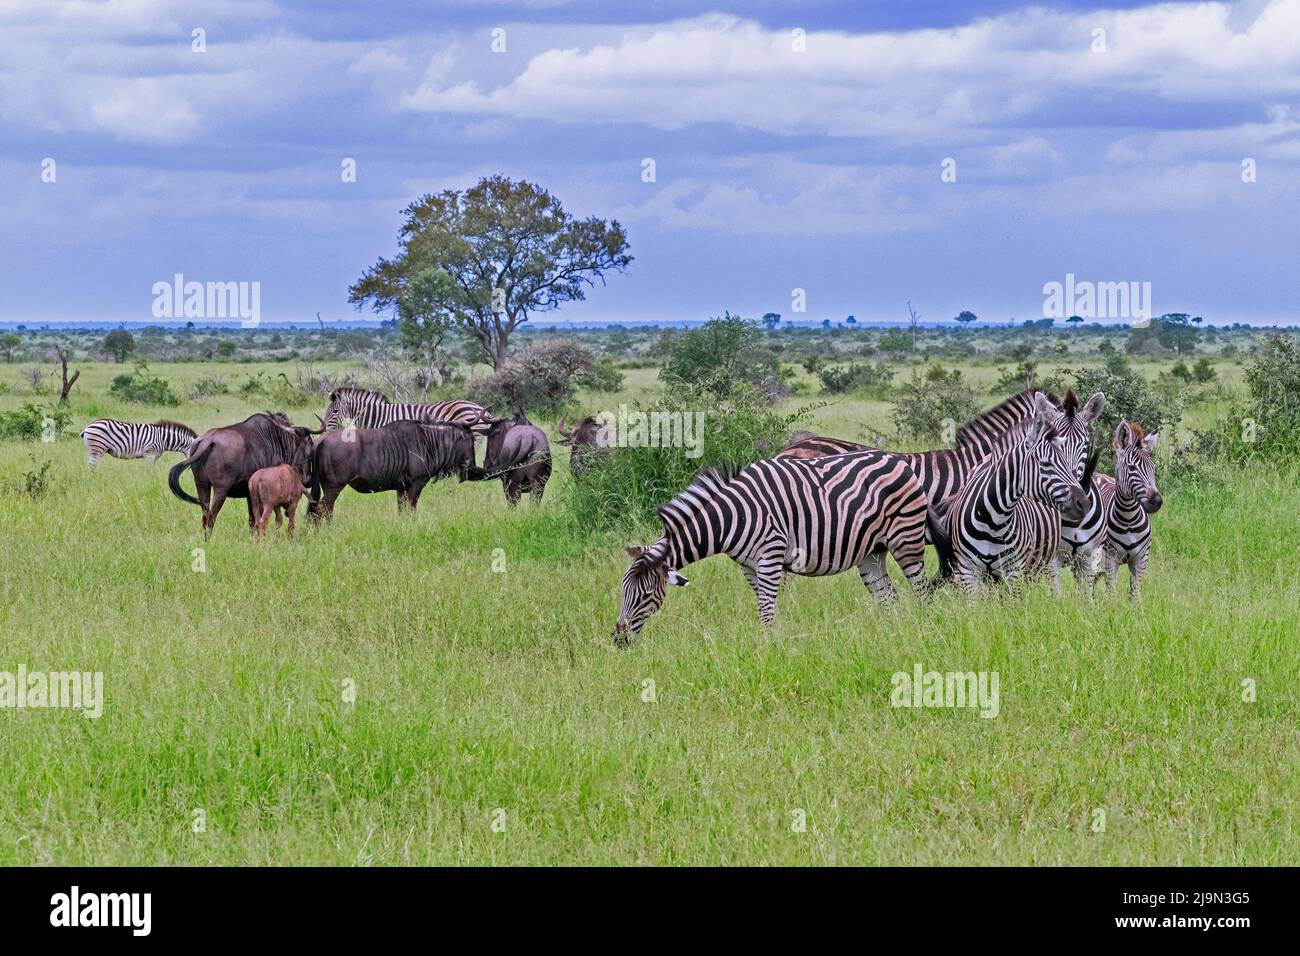 Burchell's zebras and blue wildebeest (Connochaetes taurinus) herds on the savanna in the Kruger National Park, Mpumalanga, South Africa Stock Photo